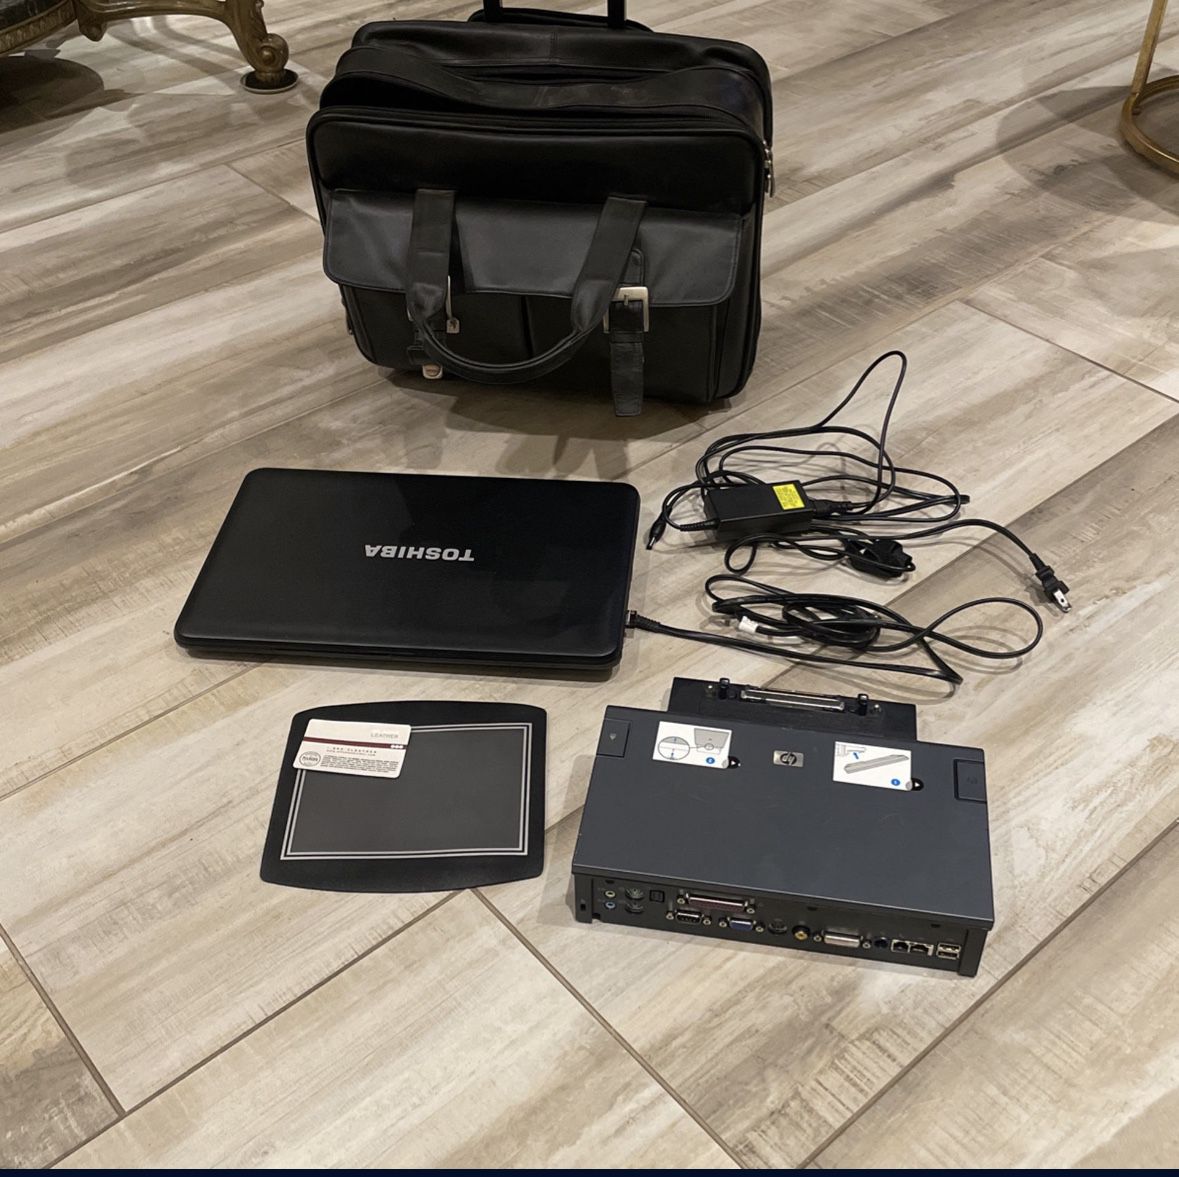 Toshiba Laptop with charger, Wilson Leather Business Bag, HP Docking Station, Mouse Pad.  